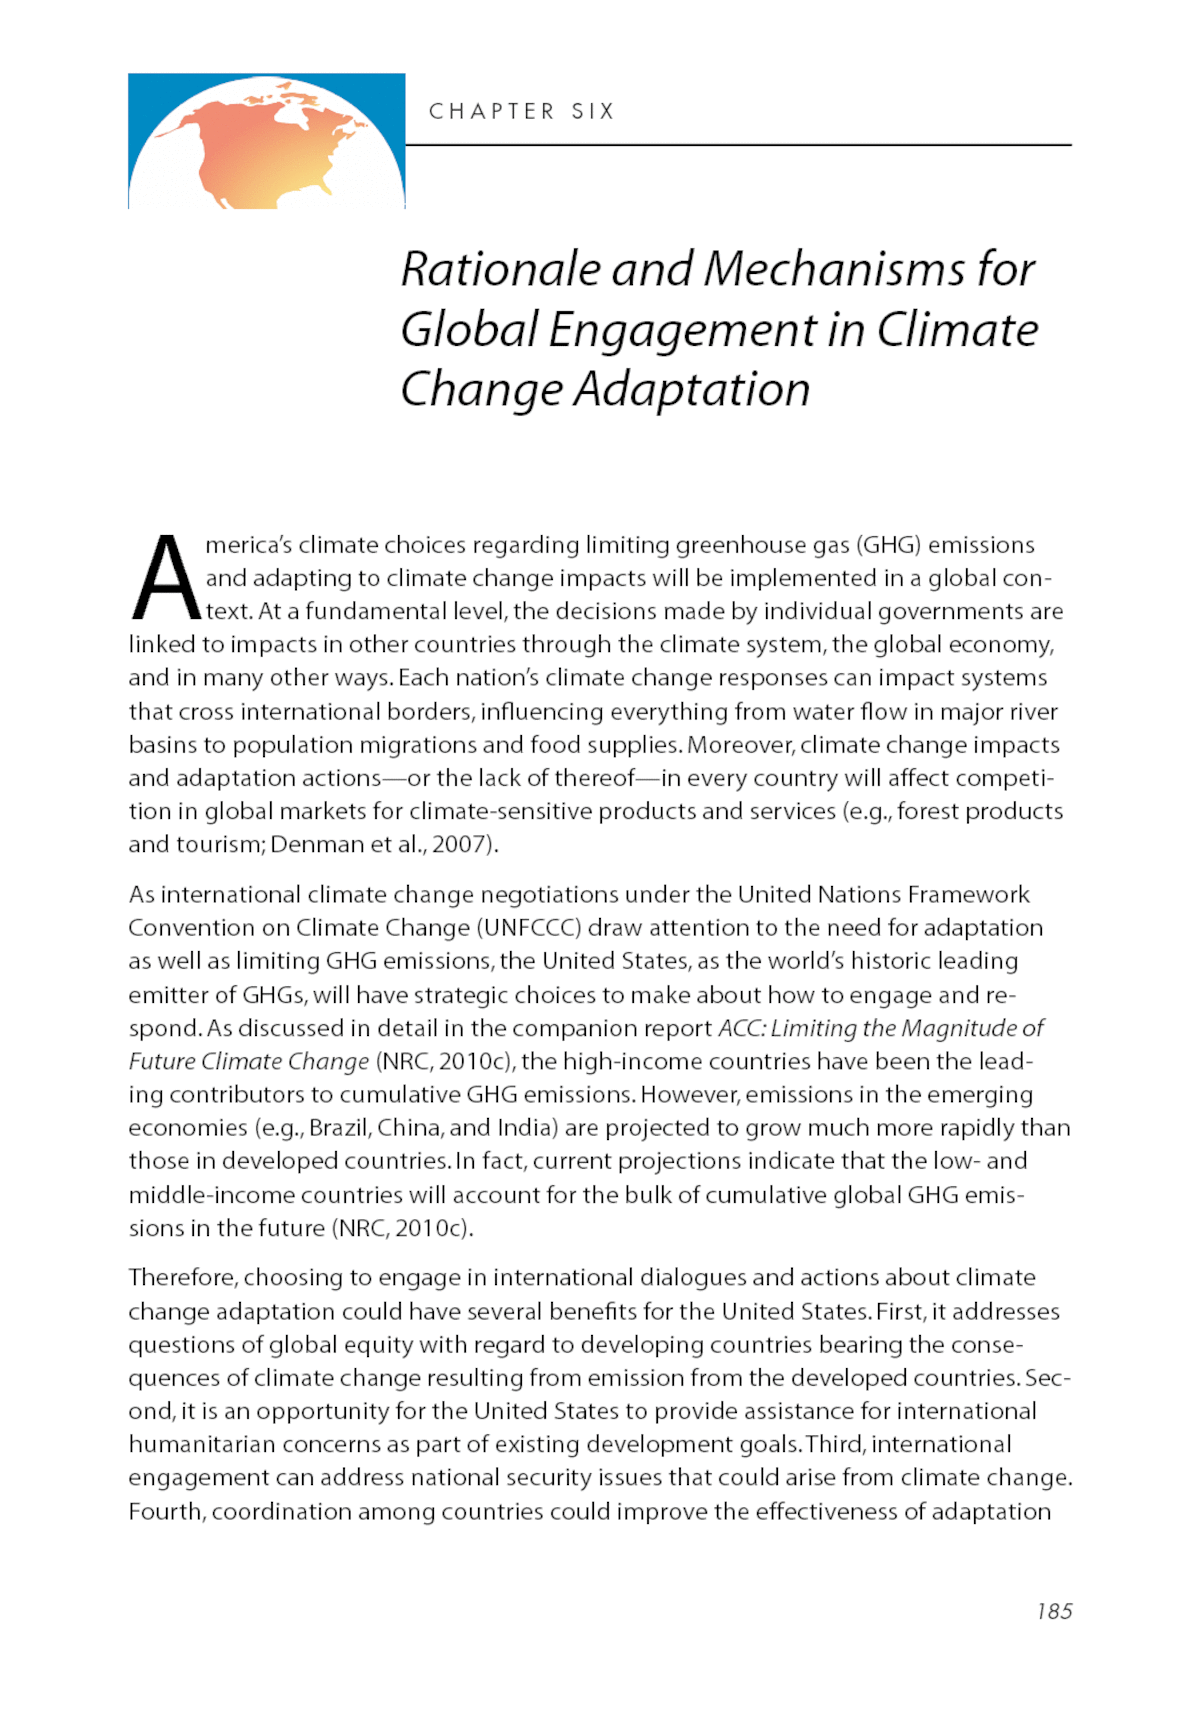 25 Rationale and Mechanisms for Global Engagement in Climate Change